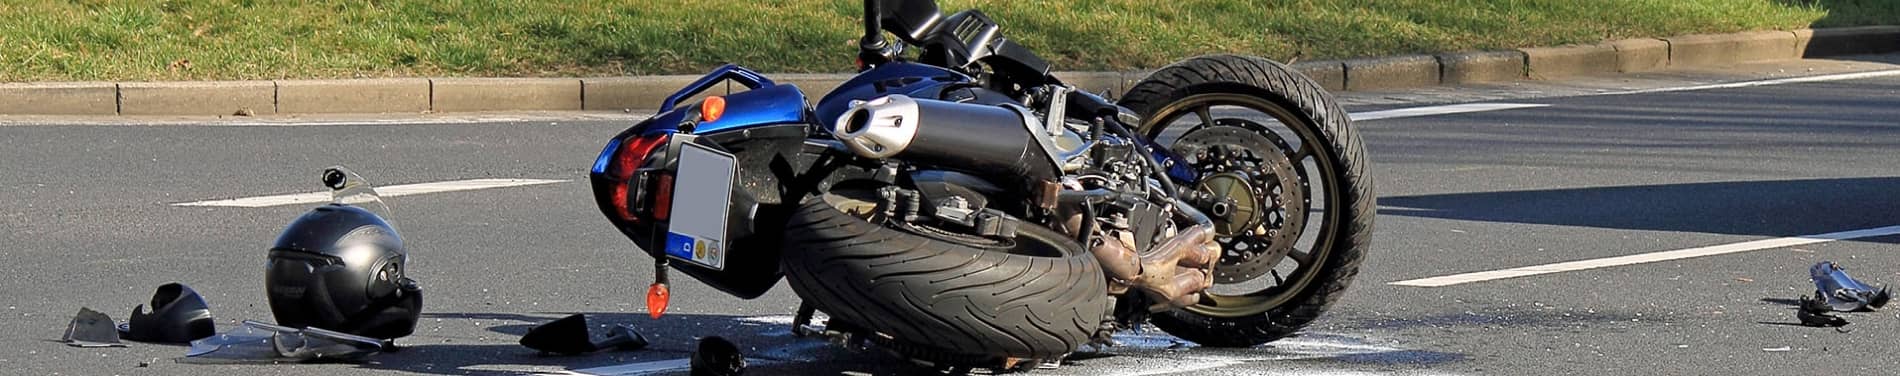 Wrecked Motorcycle after Crash